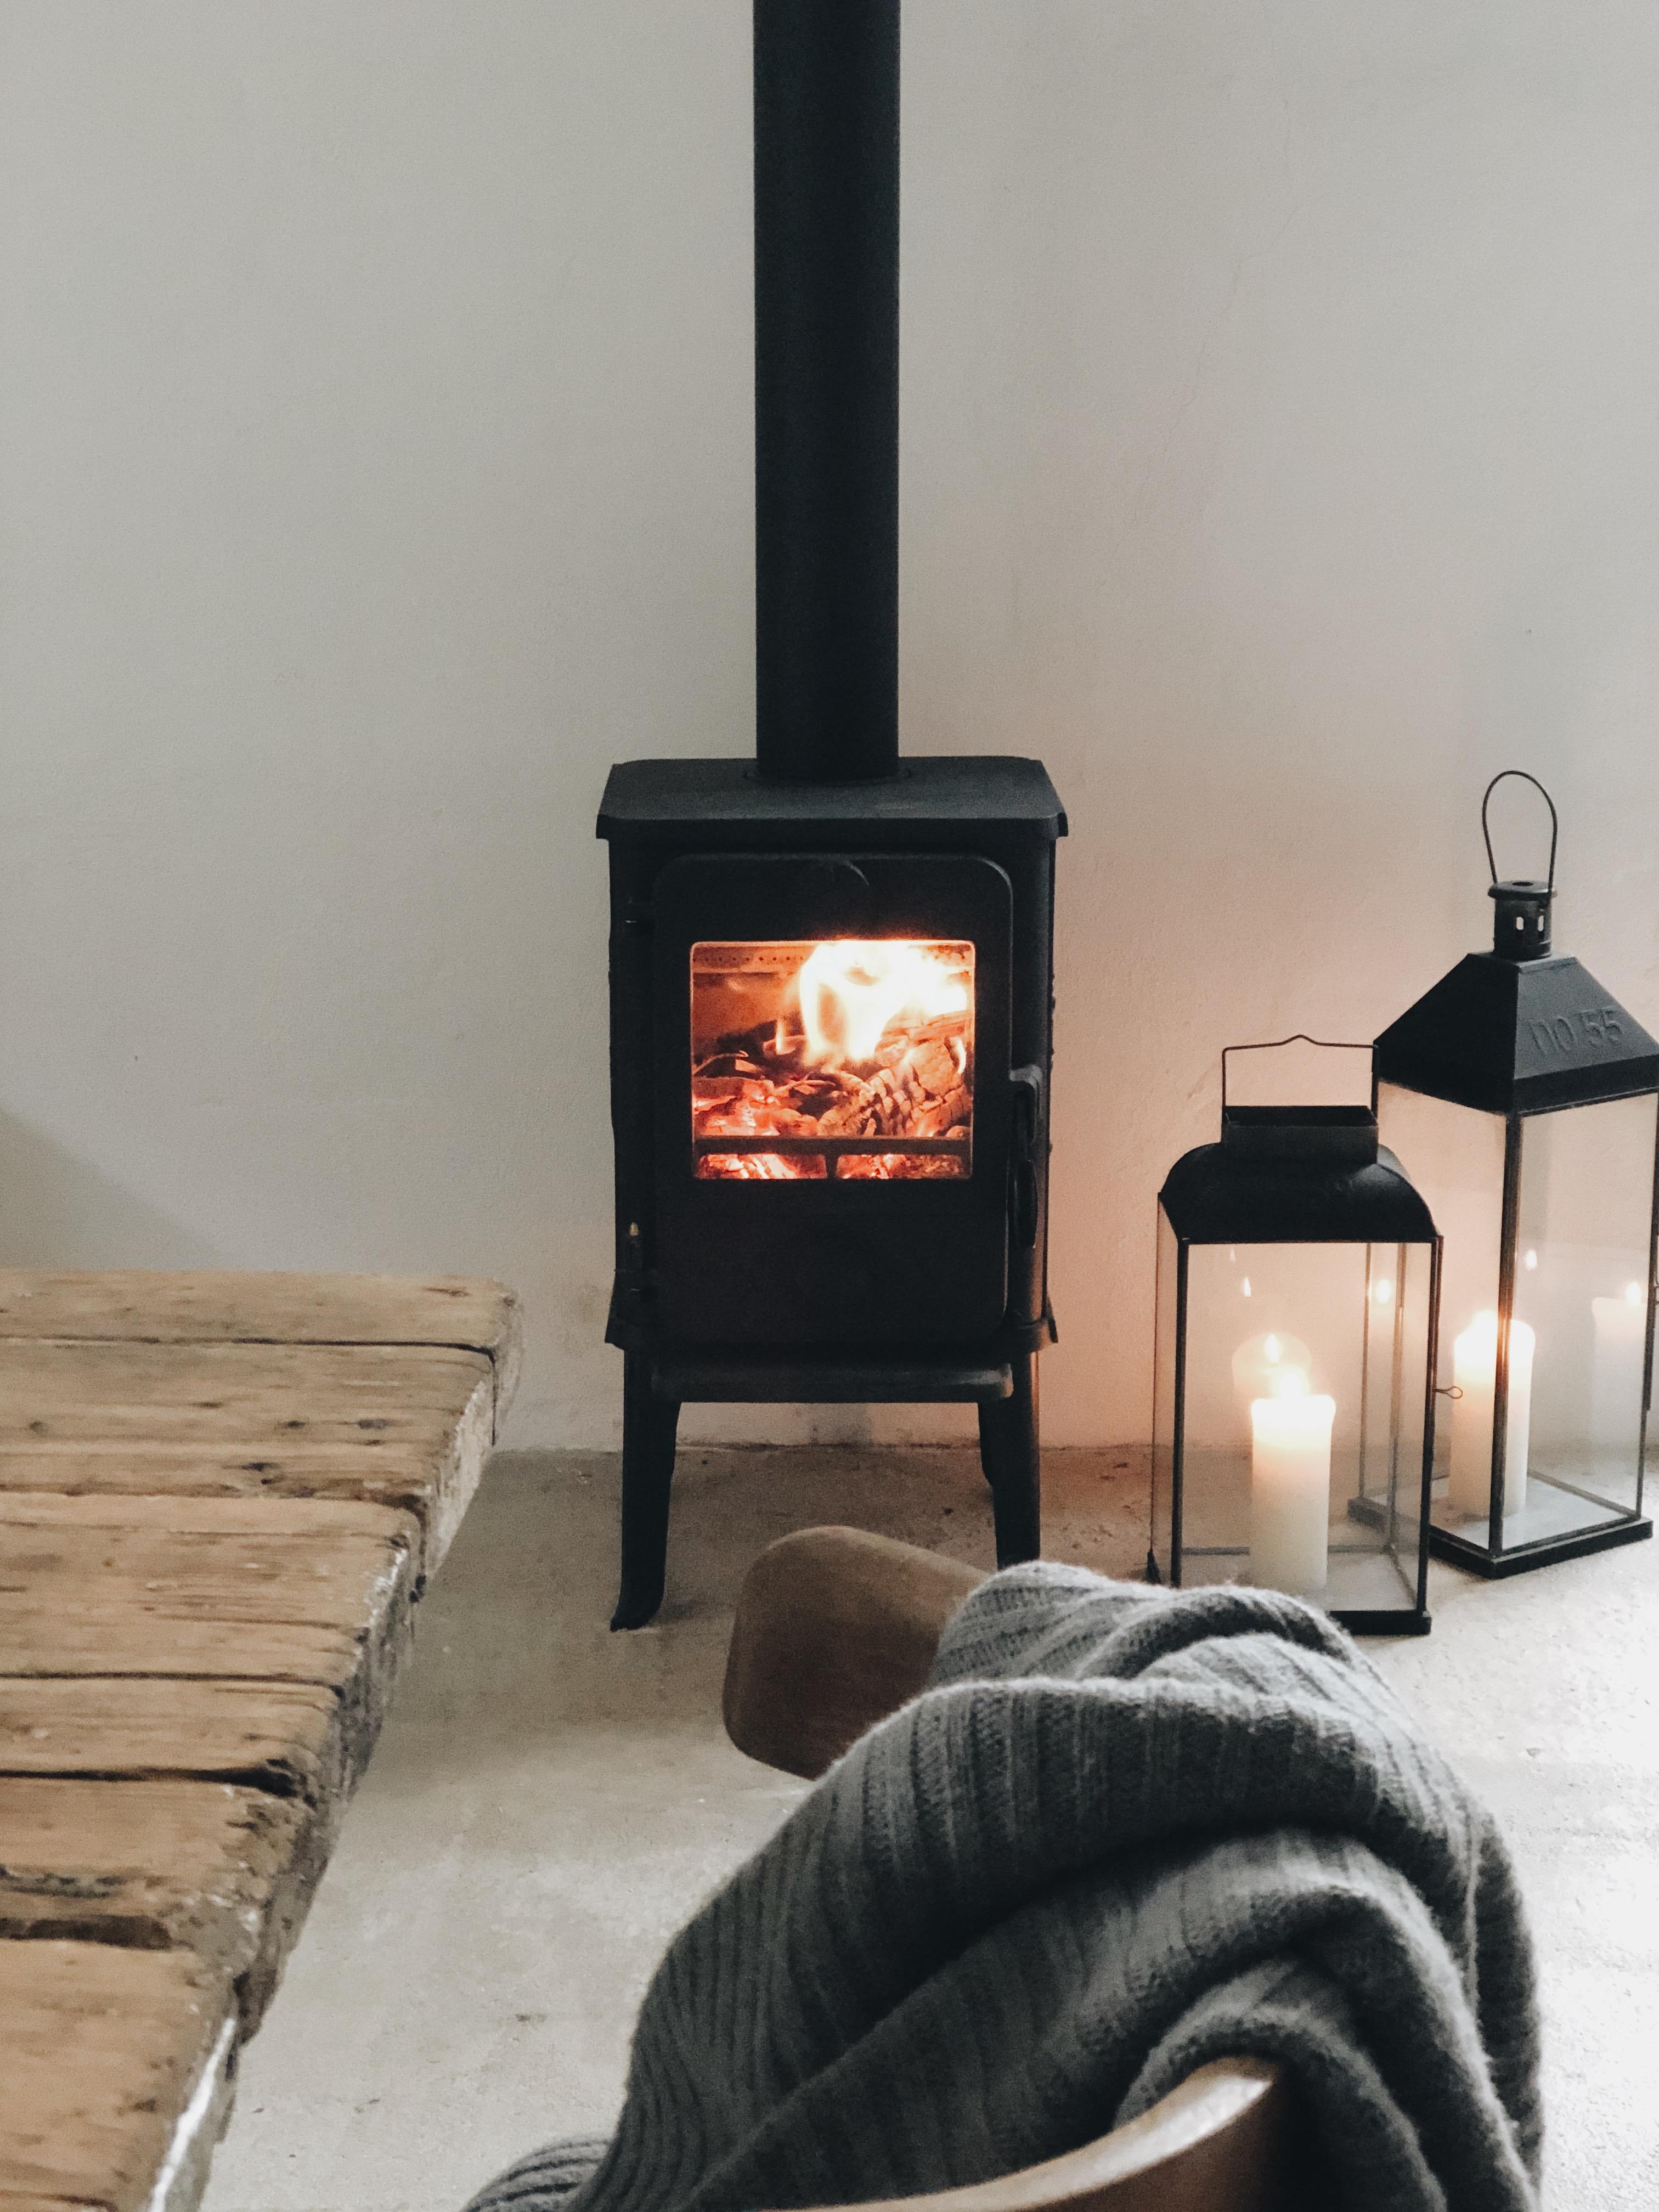 #cozy #ofen #fireplace #hygge